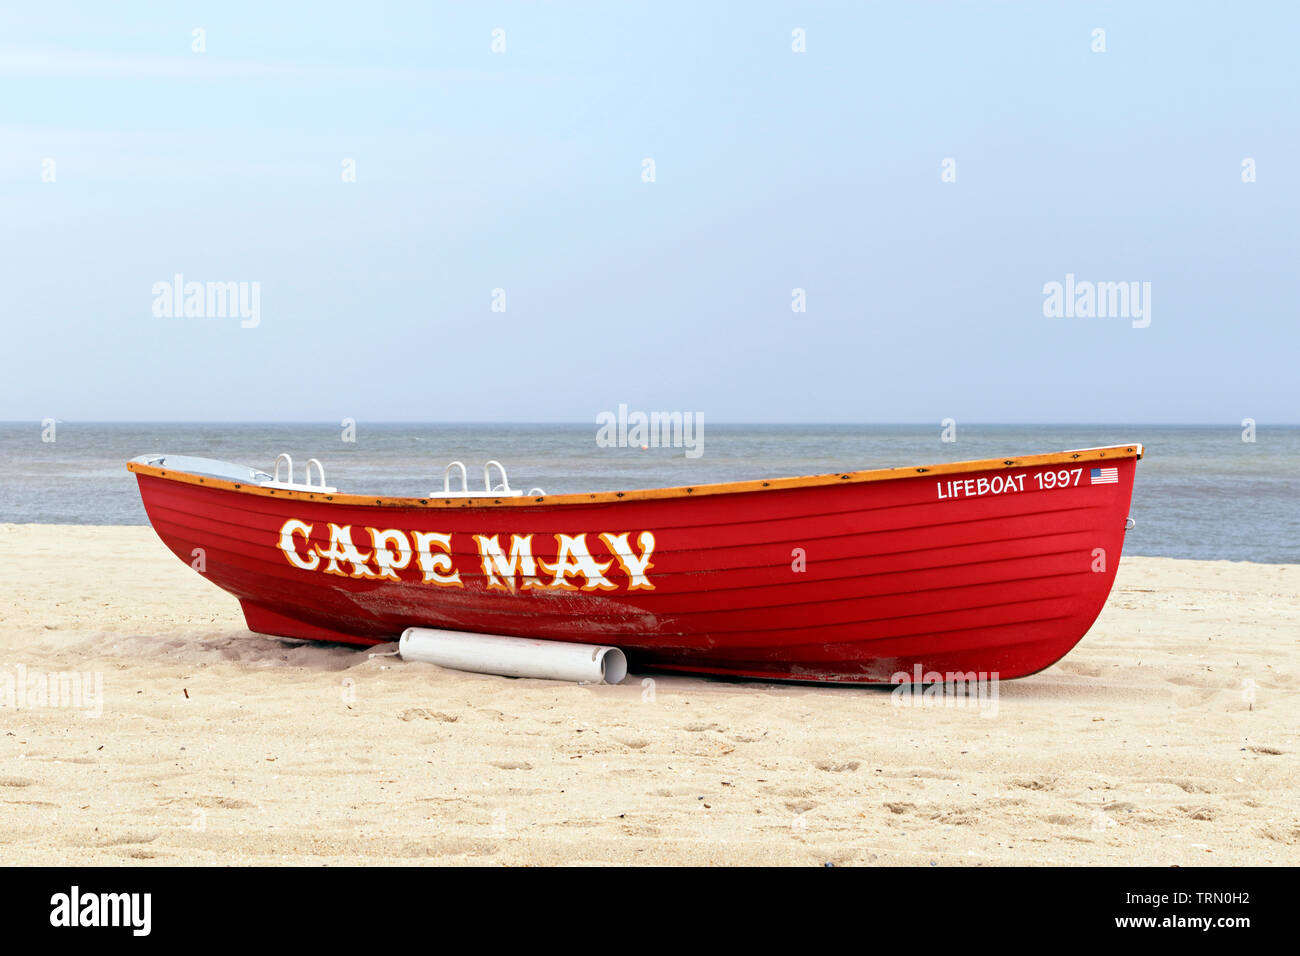 Eine rote Rettungsboot am Strand in Cape May, New Jersey, USA Stockfoto